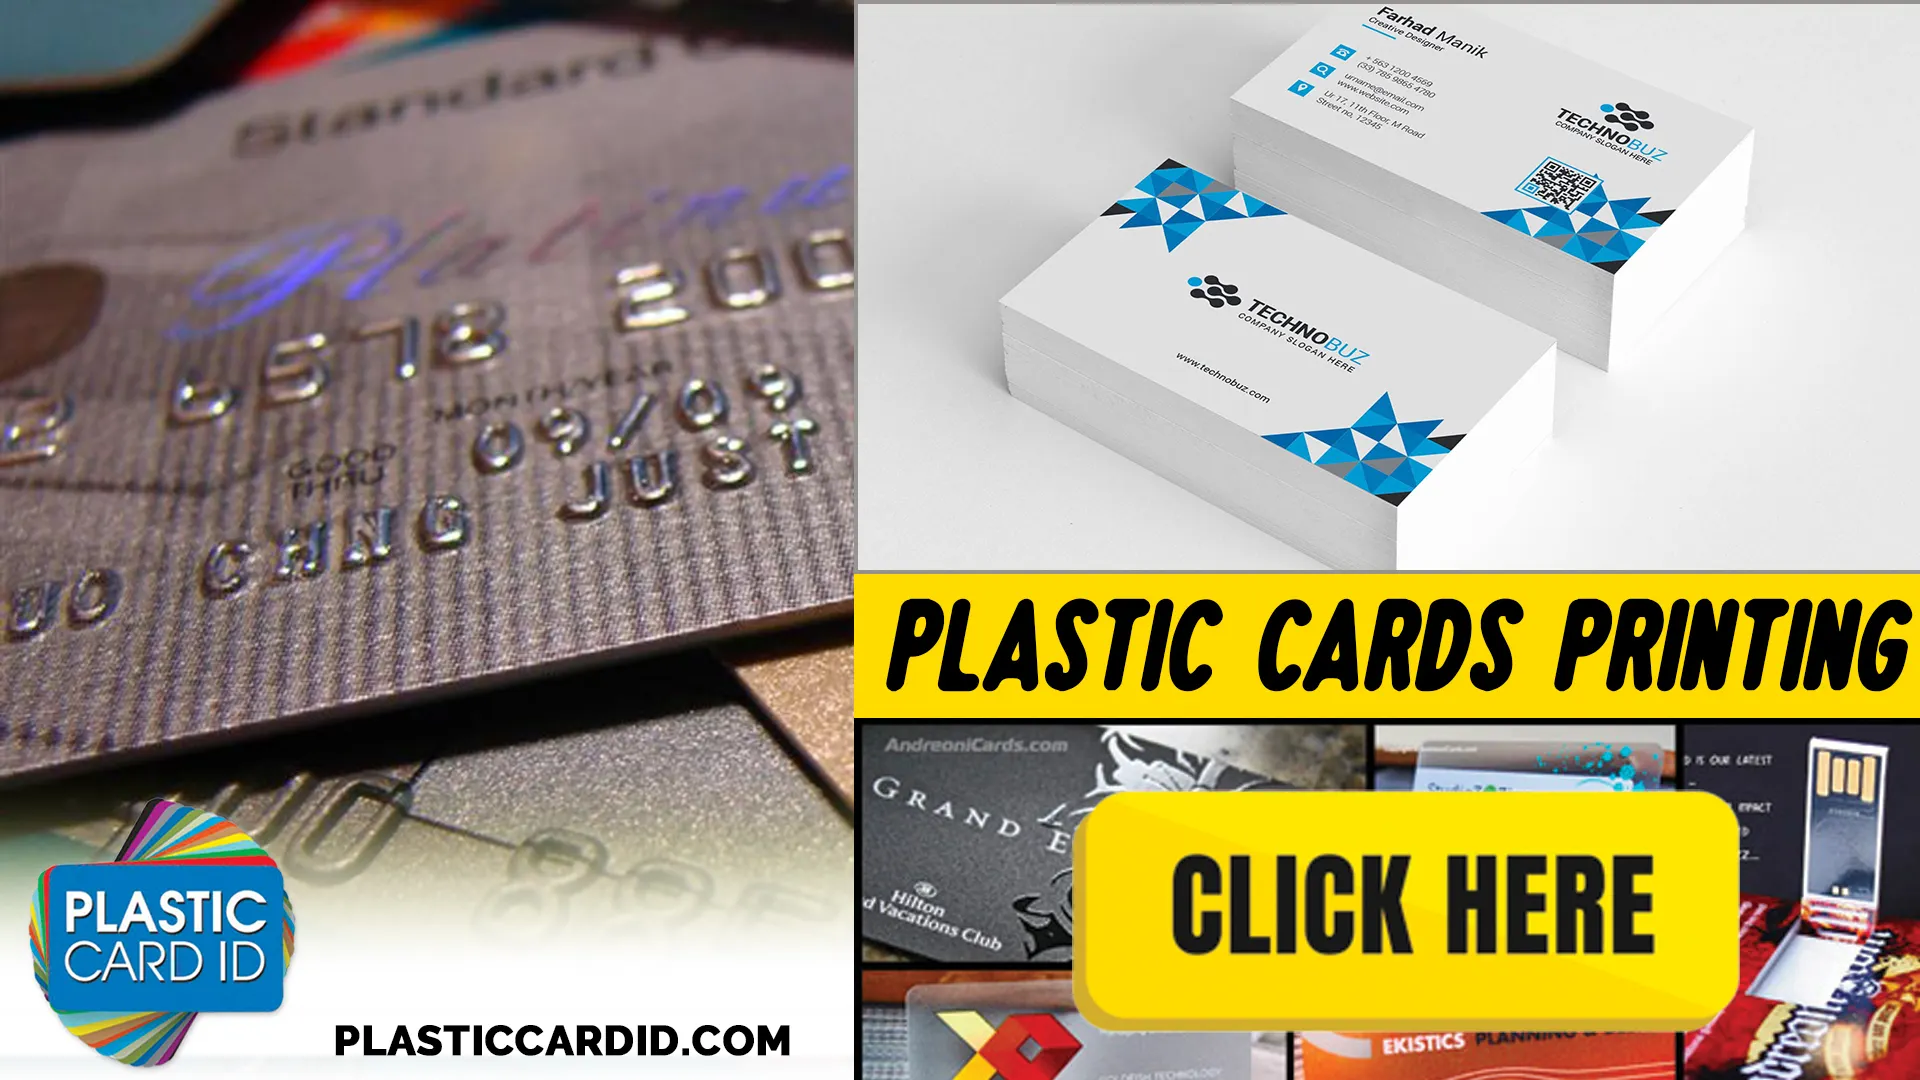 Assessing the Long-Term Cost Benefits with Plastic Card ID
